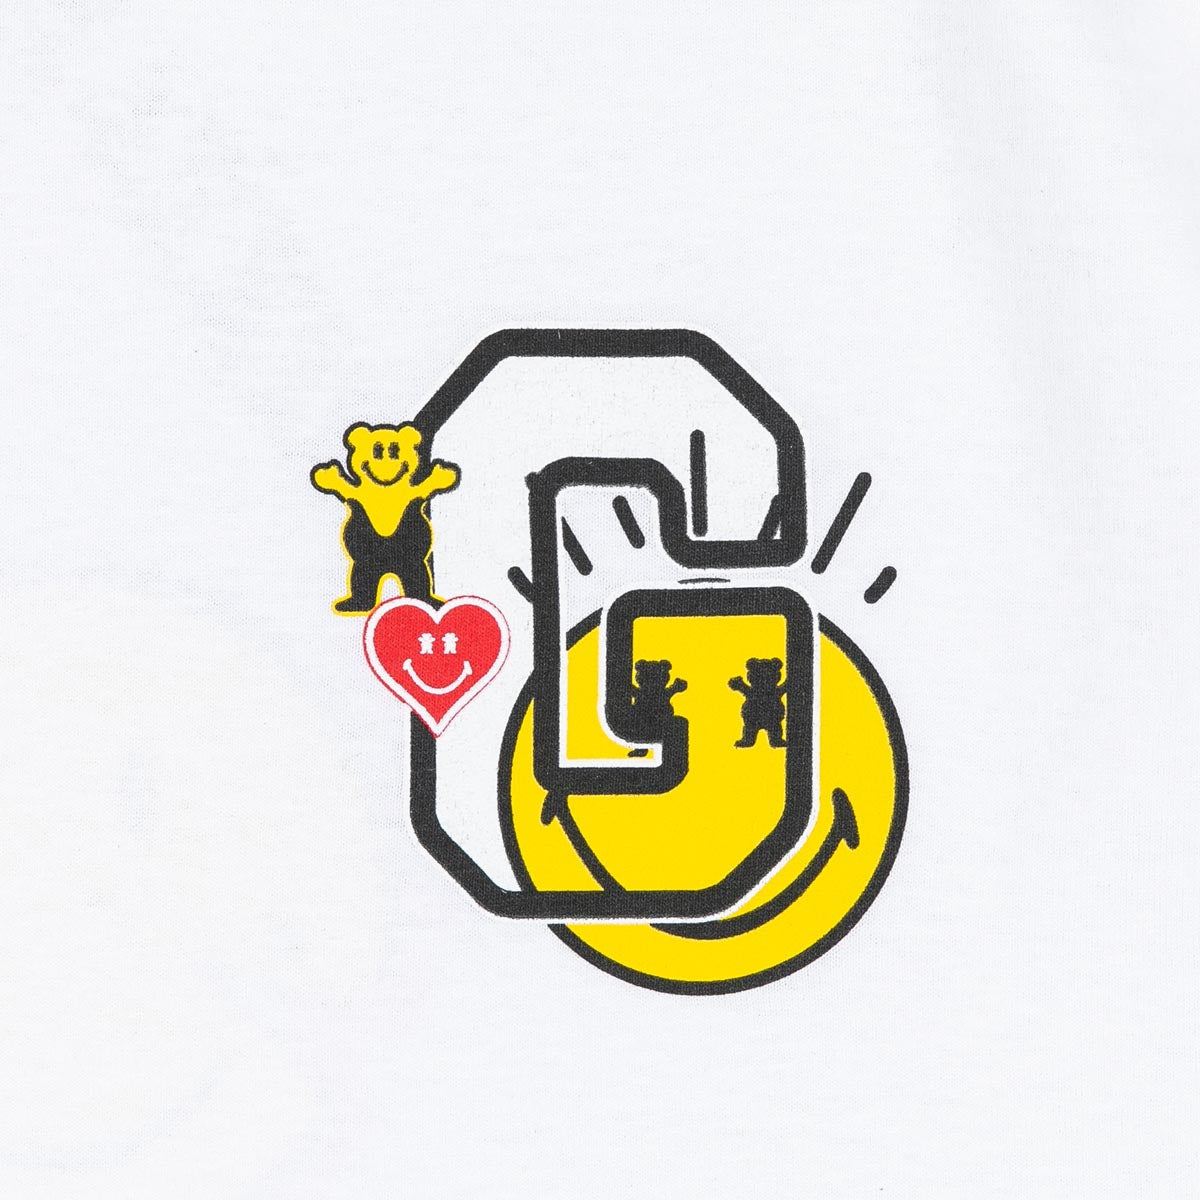 Grizzly x Smiley World T-Shirt - White image 3